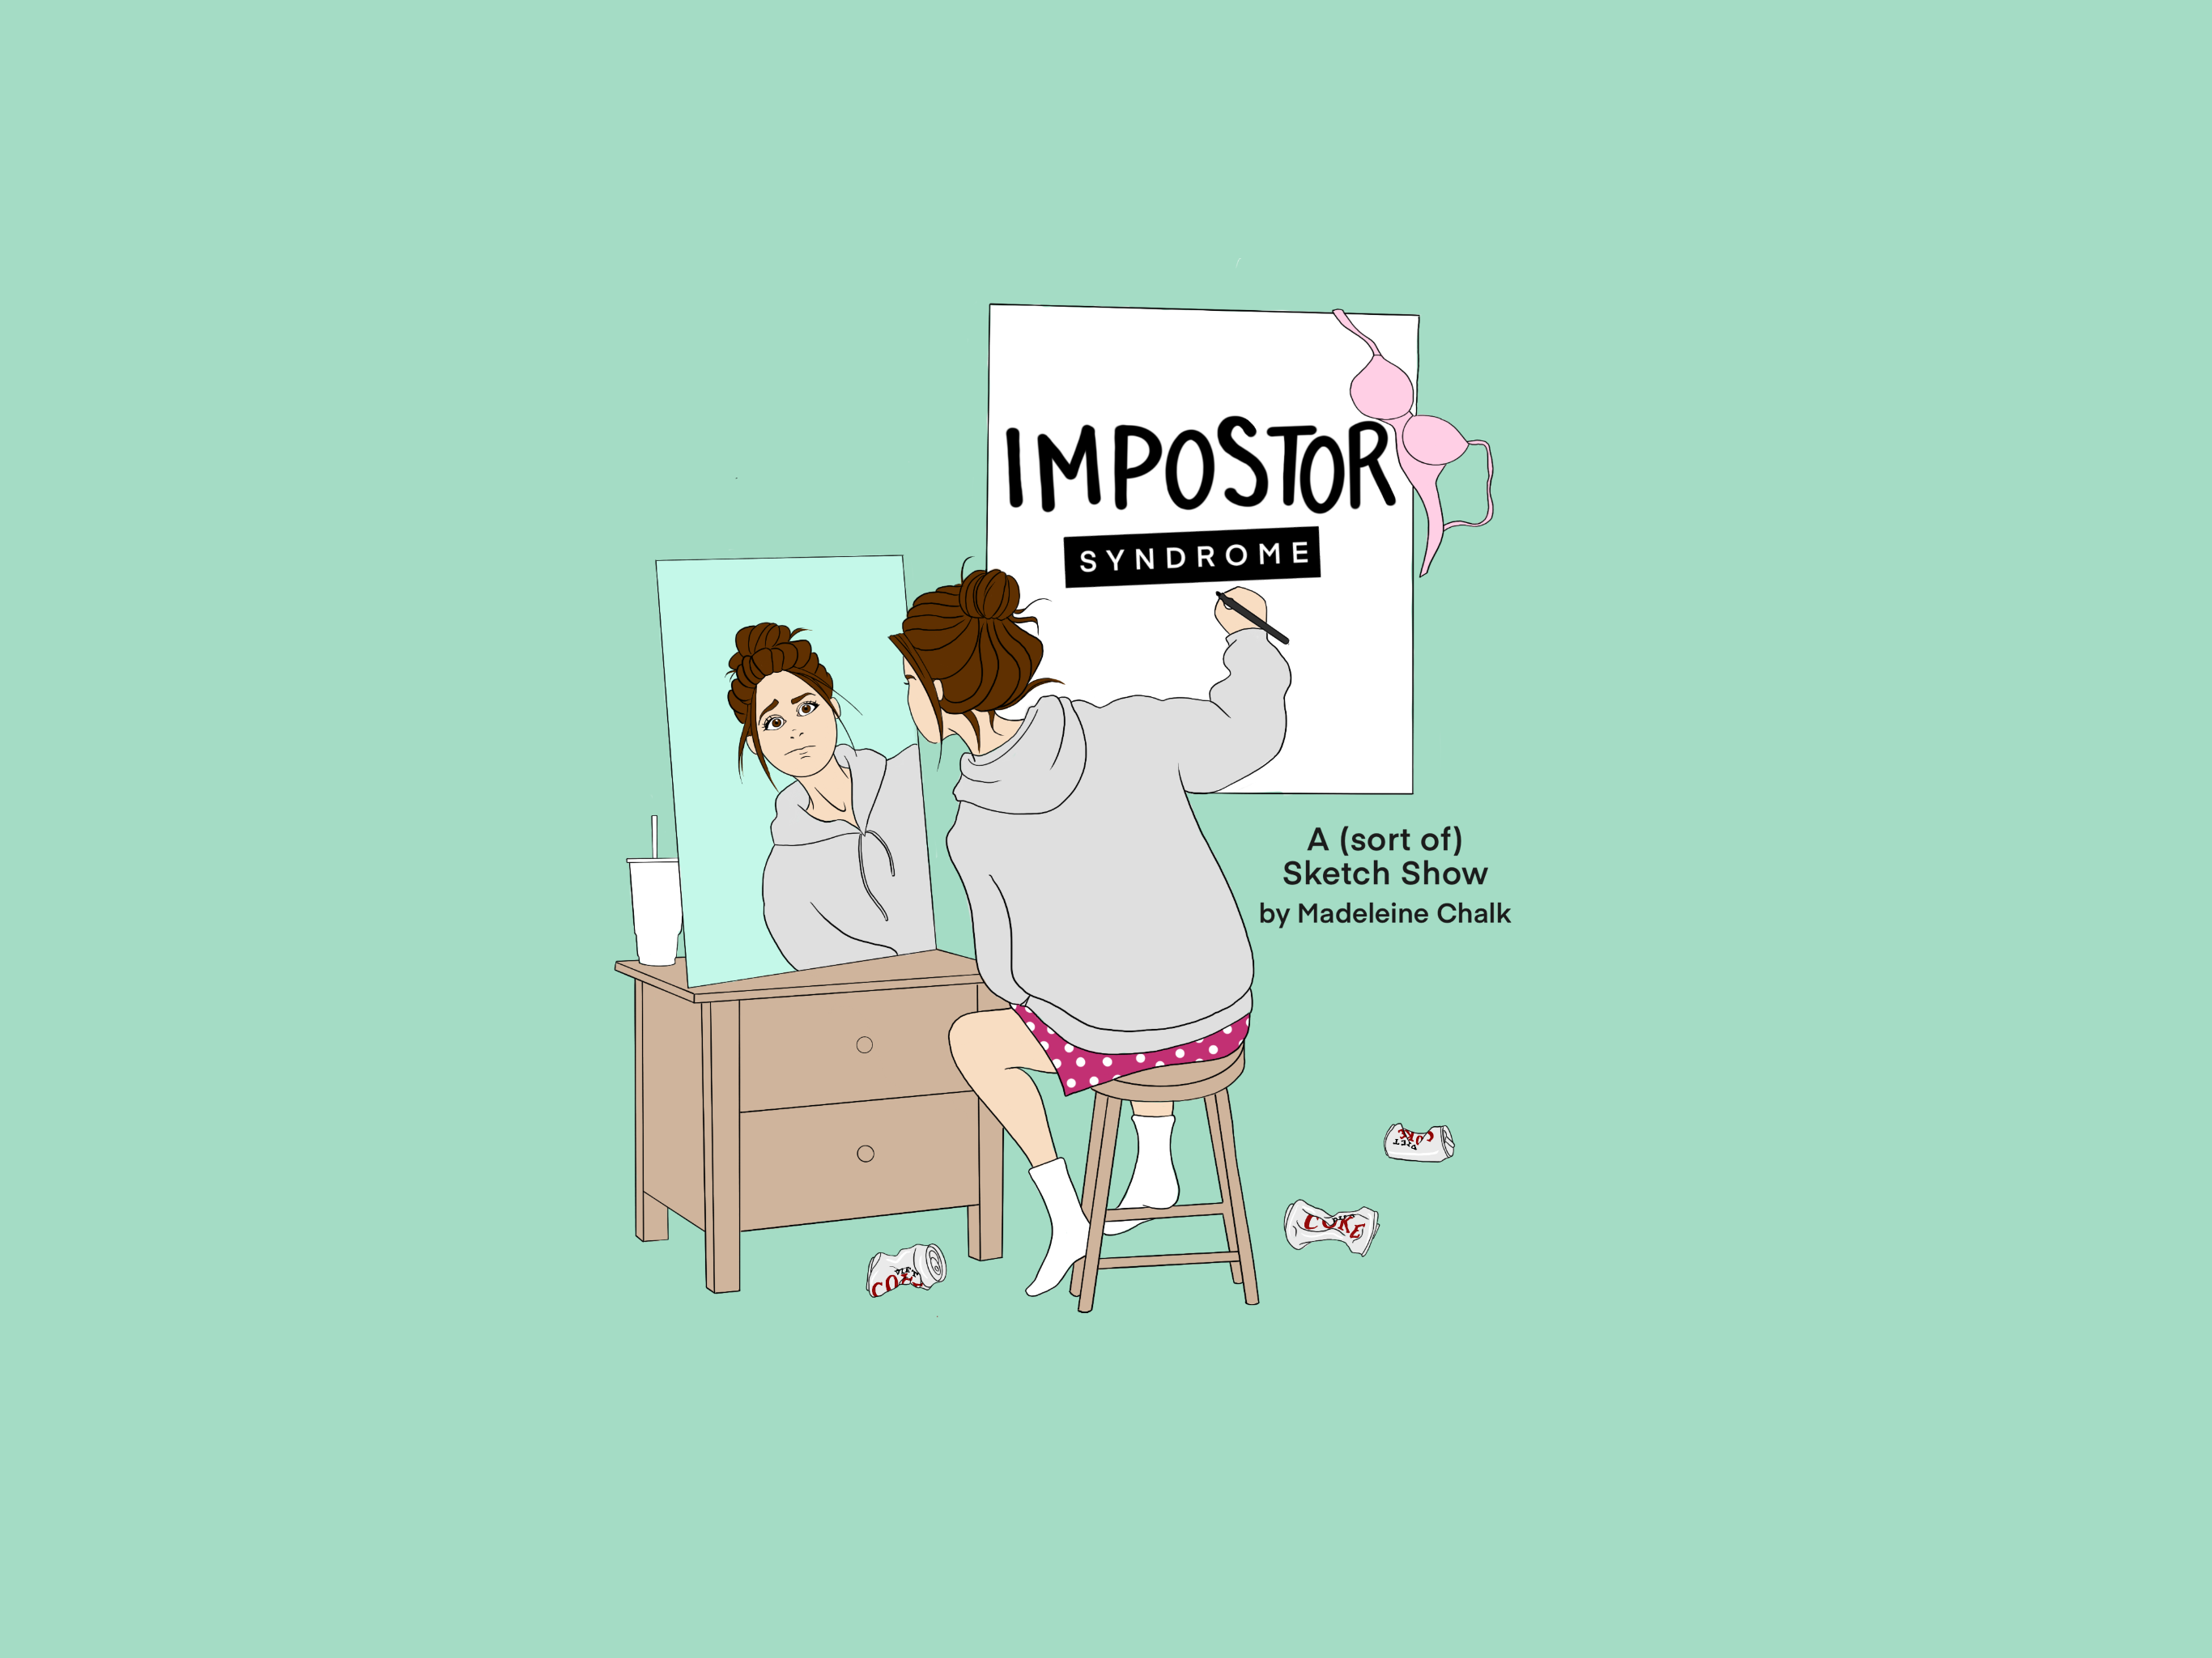 IMPOSTOR SYNDROME: A (sort of) Sketch Show by Madeleine Chalk